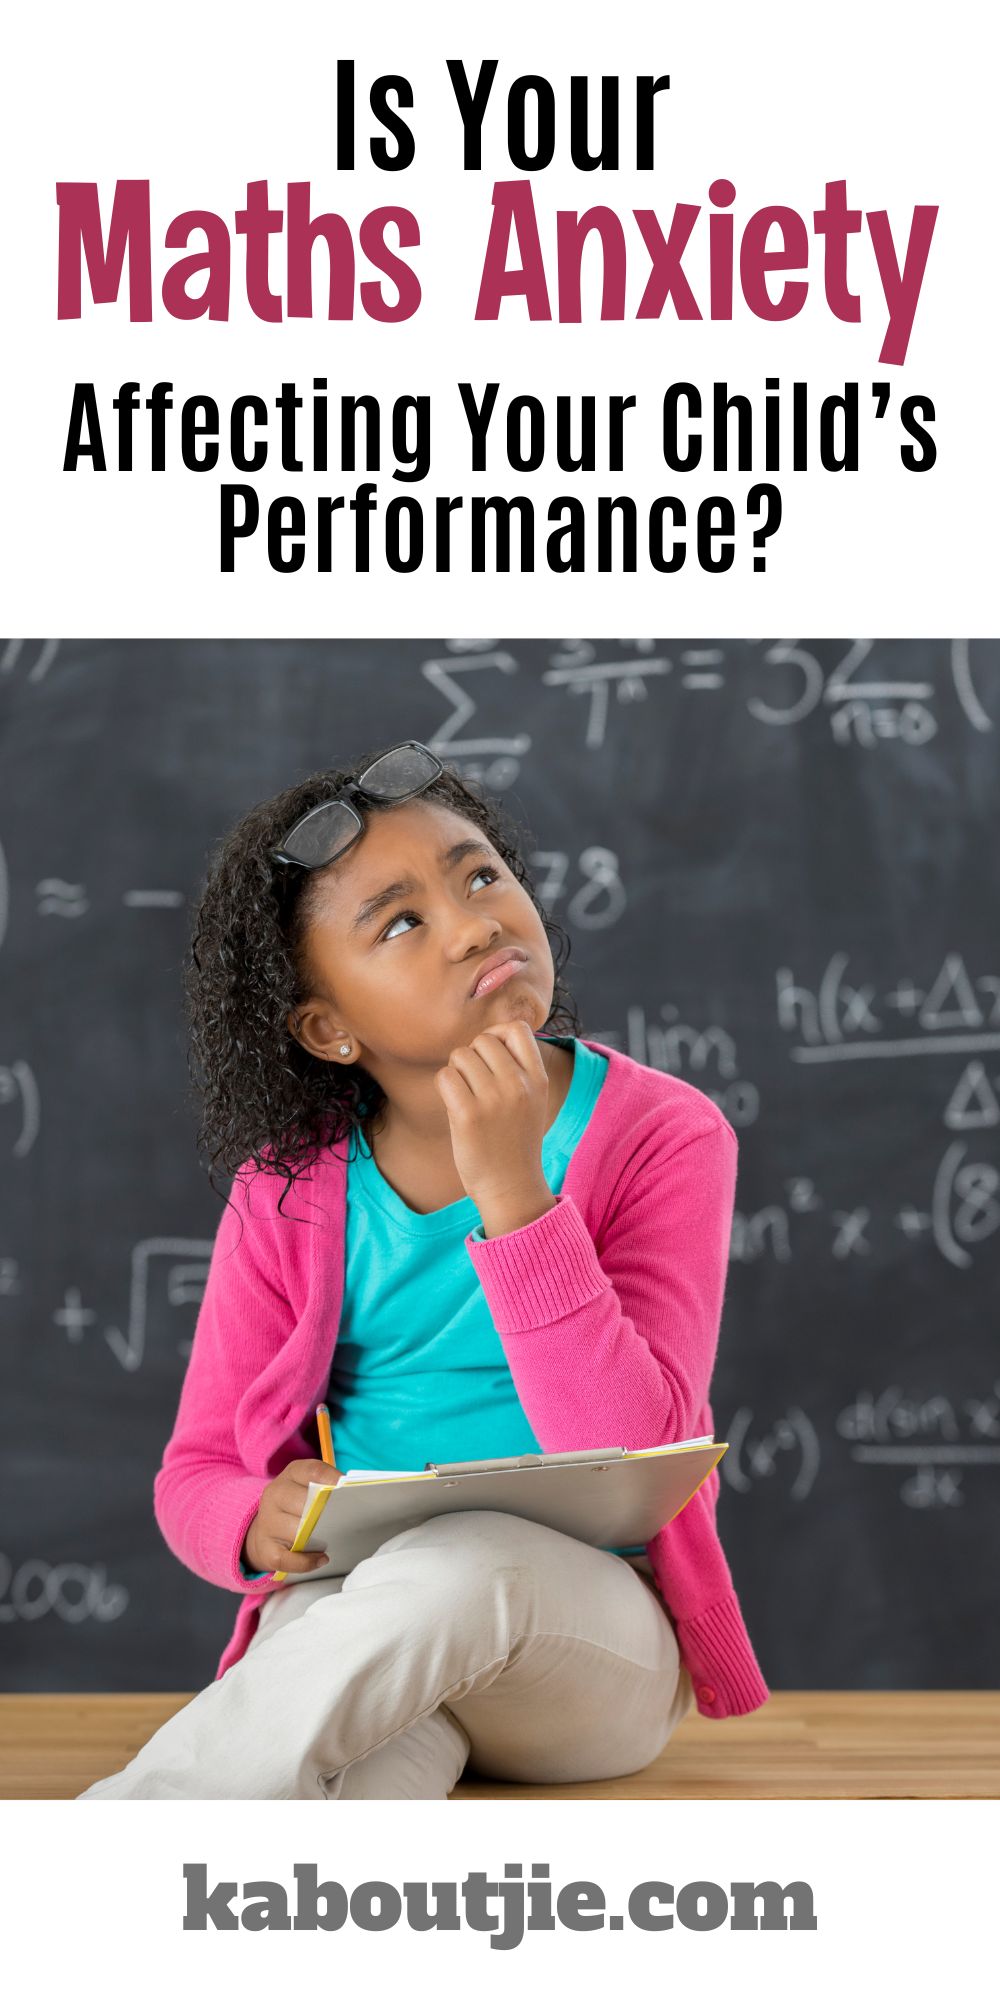 Is your maths anxiety affecting your child's performance?